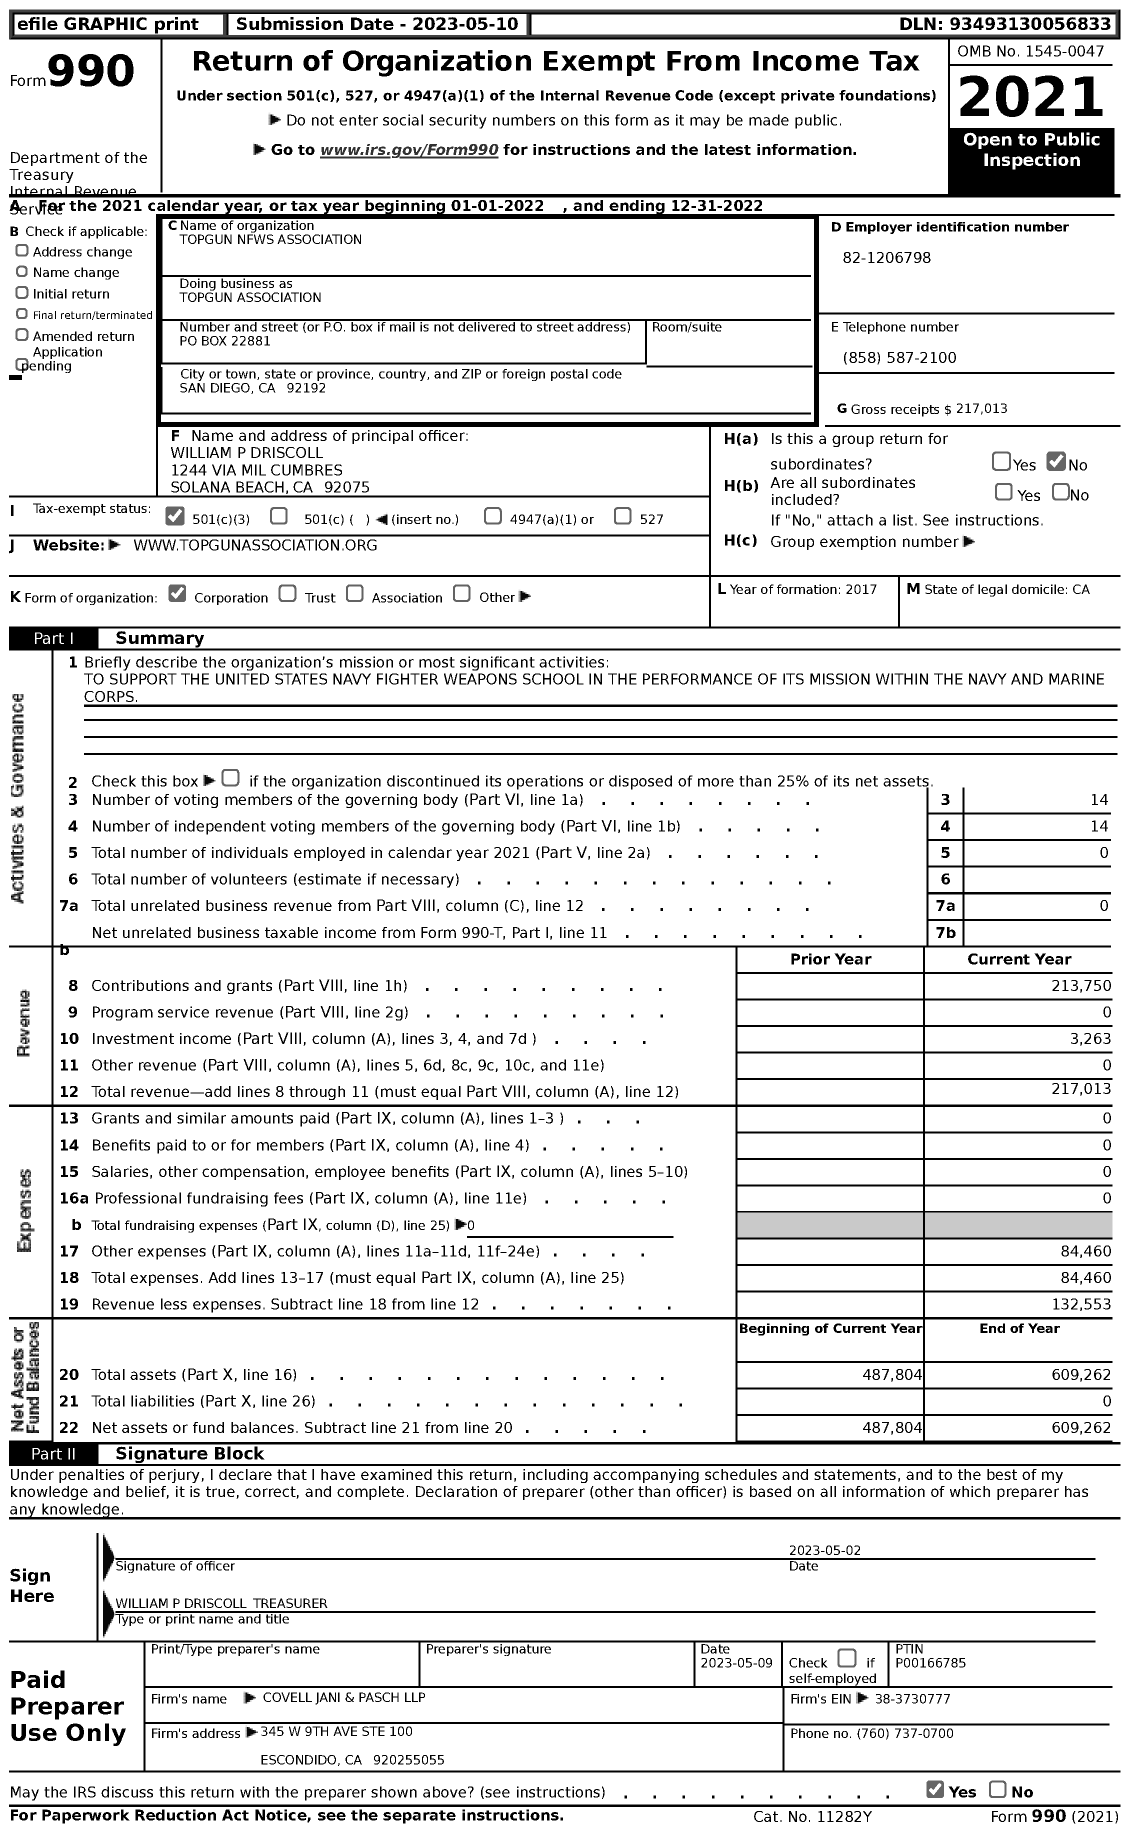 Image of first page of 2022 Form 990 for Topgun Association